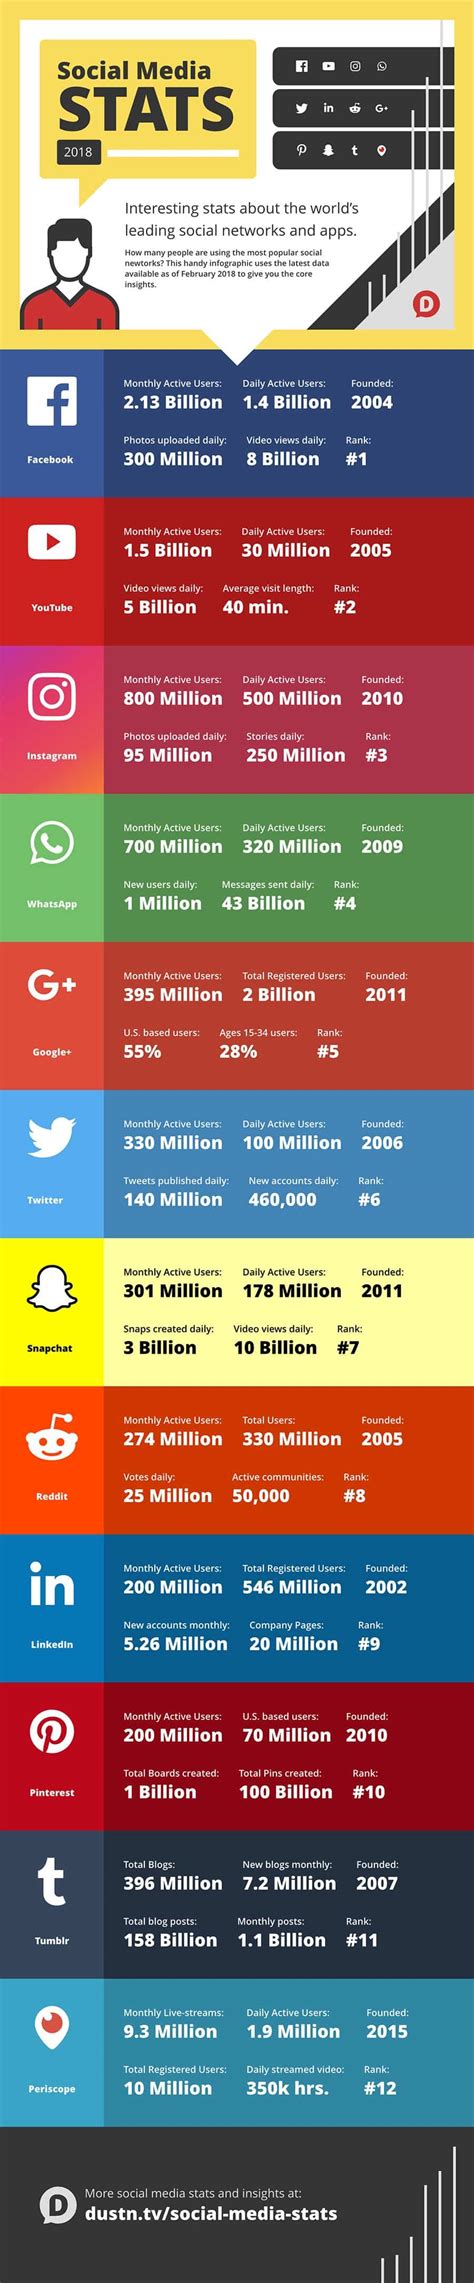 60 Social Media Stats For 2018 Infographic